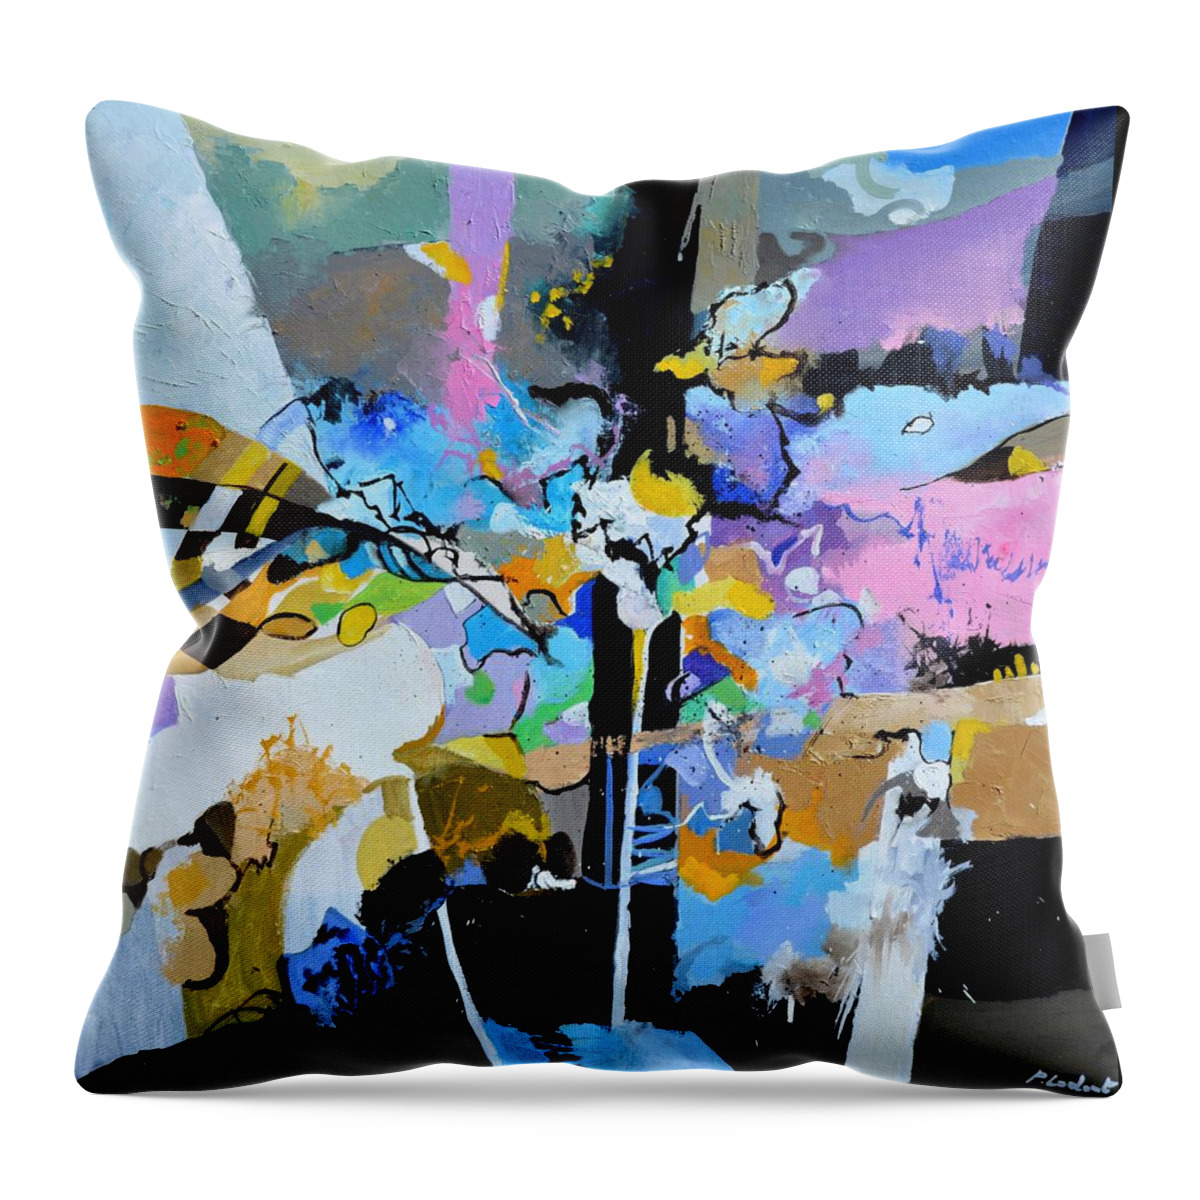 Abstract Throw Pillow featuring the painting Salambo by Pol Ledent